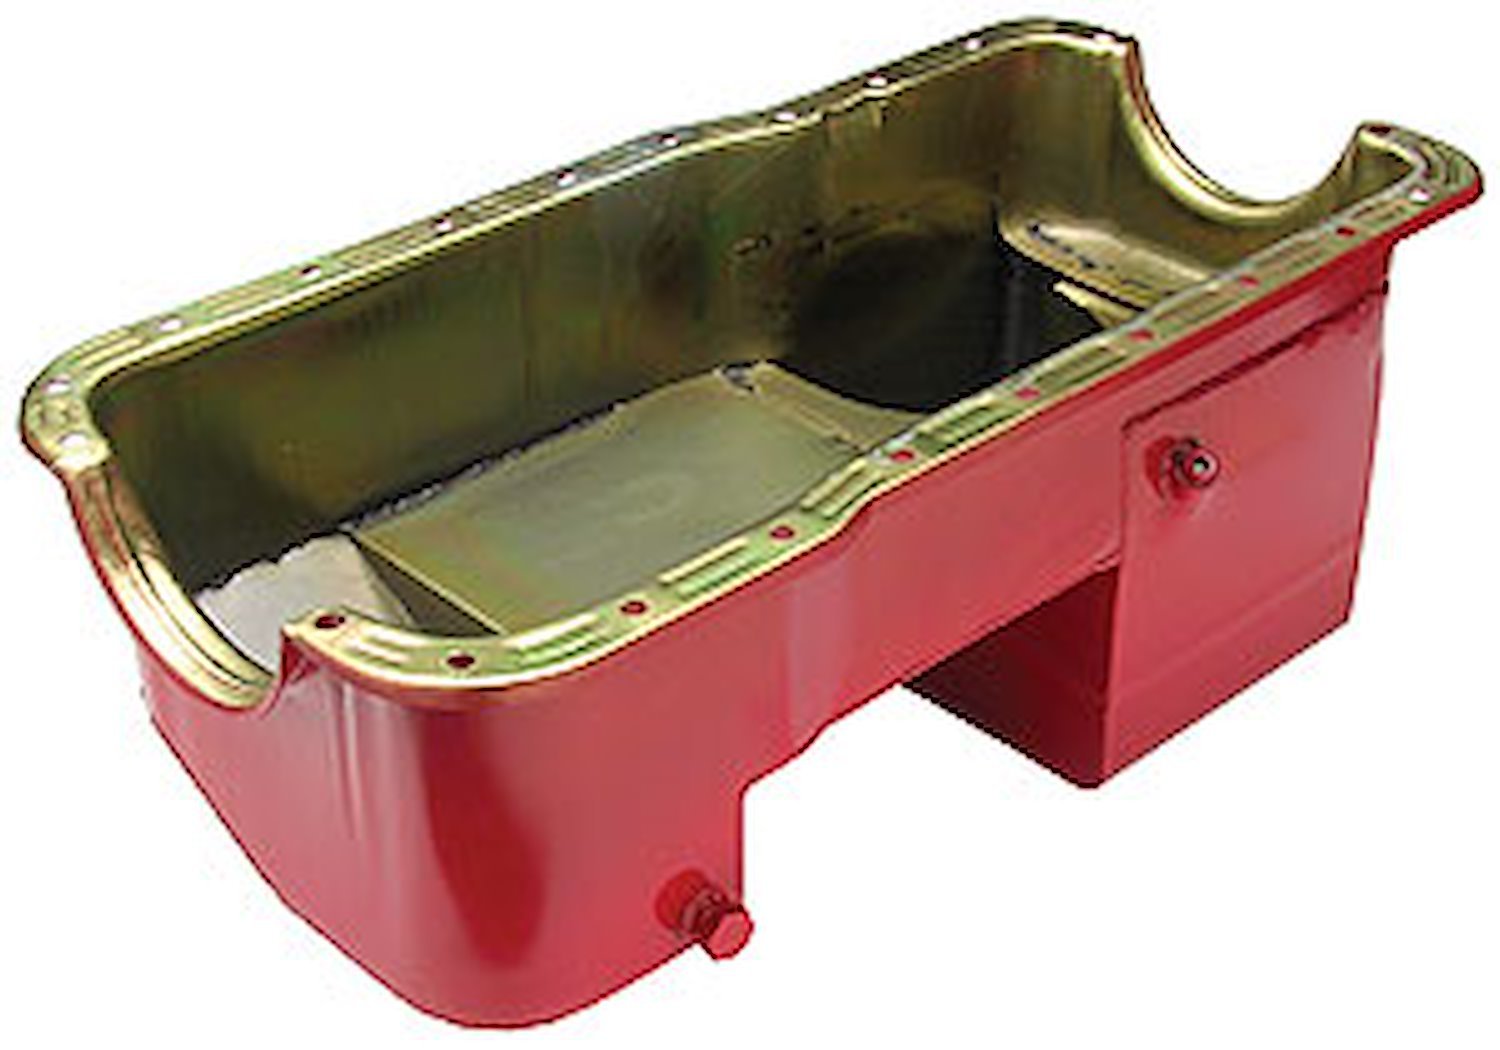 Econo Series Road Racing Oil Pan 1979-93 Small Block Ford 351W